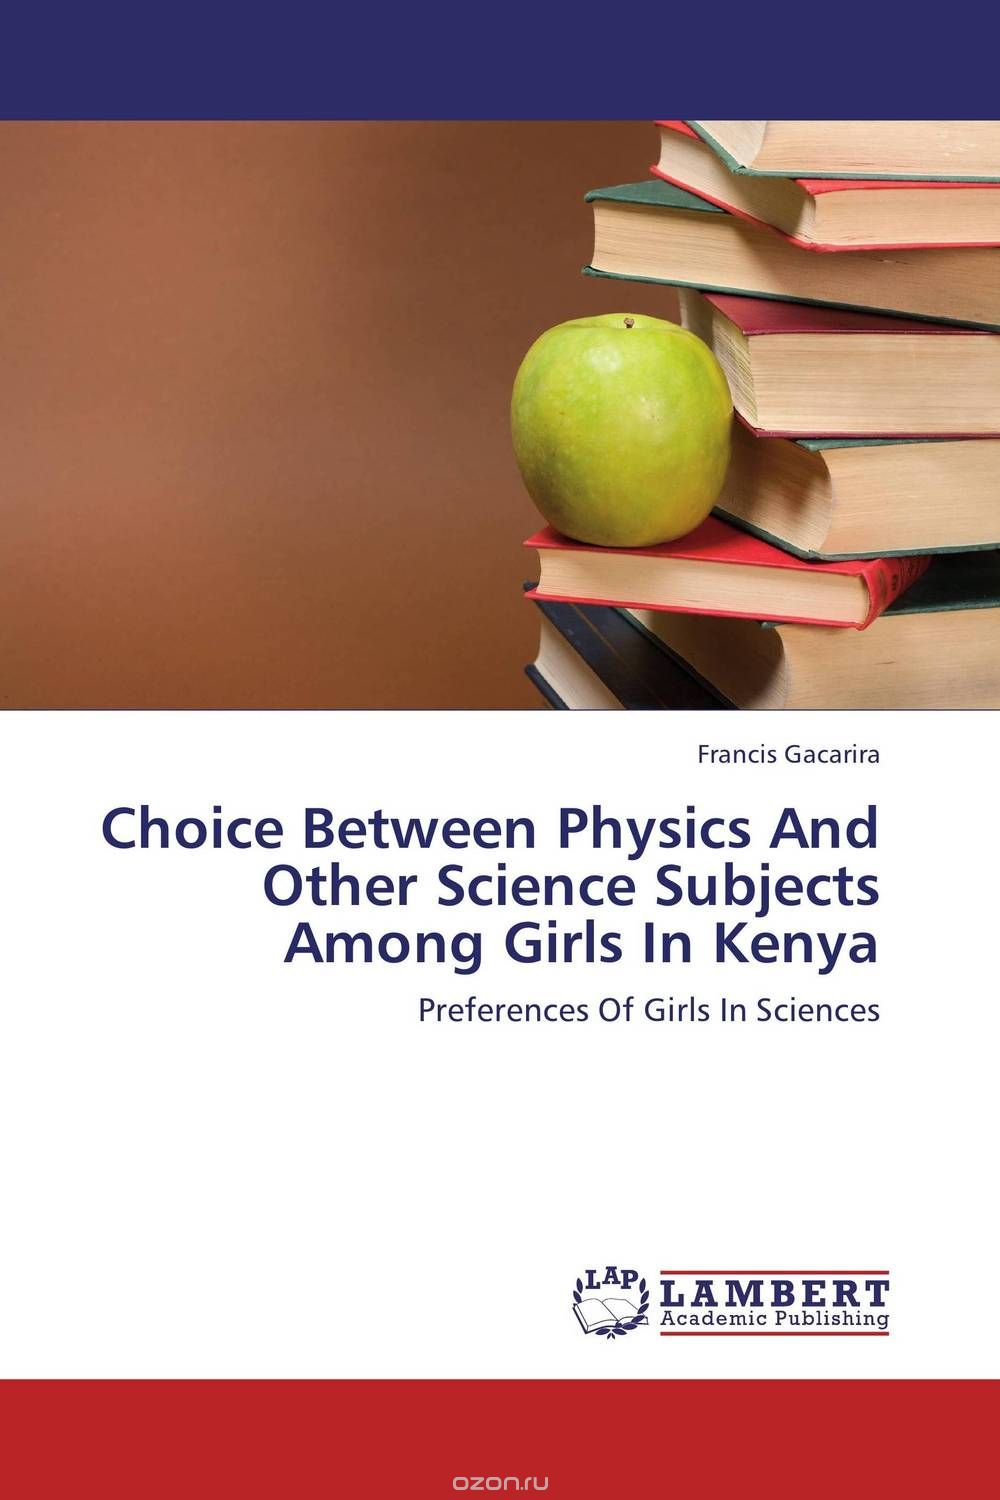 Скачать книгу "Choice Between Physics And Other Science Subjects Among Girls In Kenya"